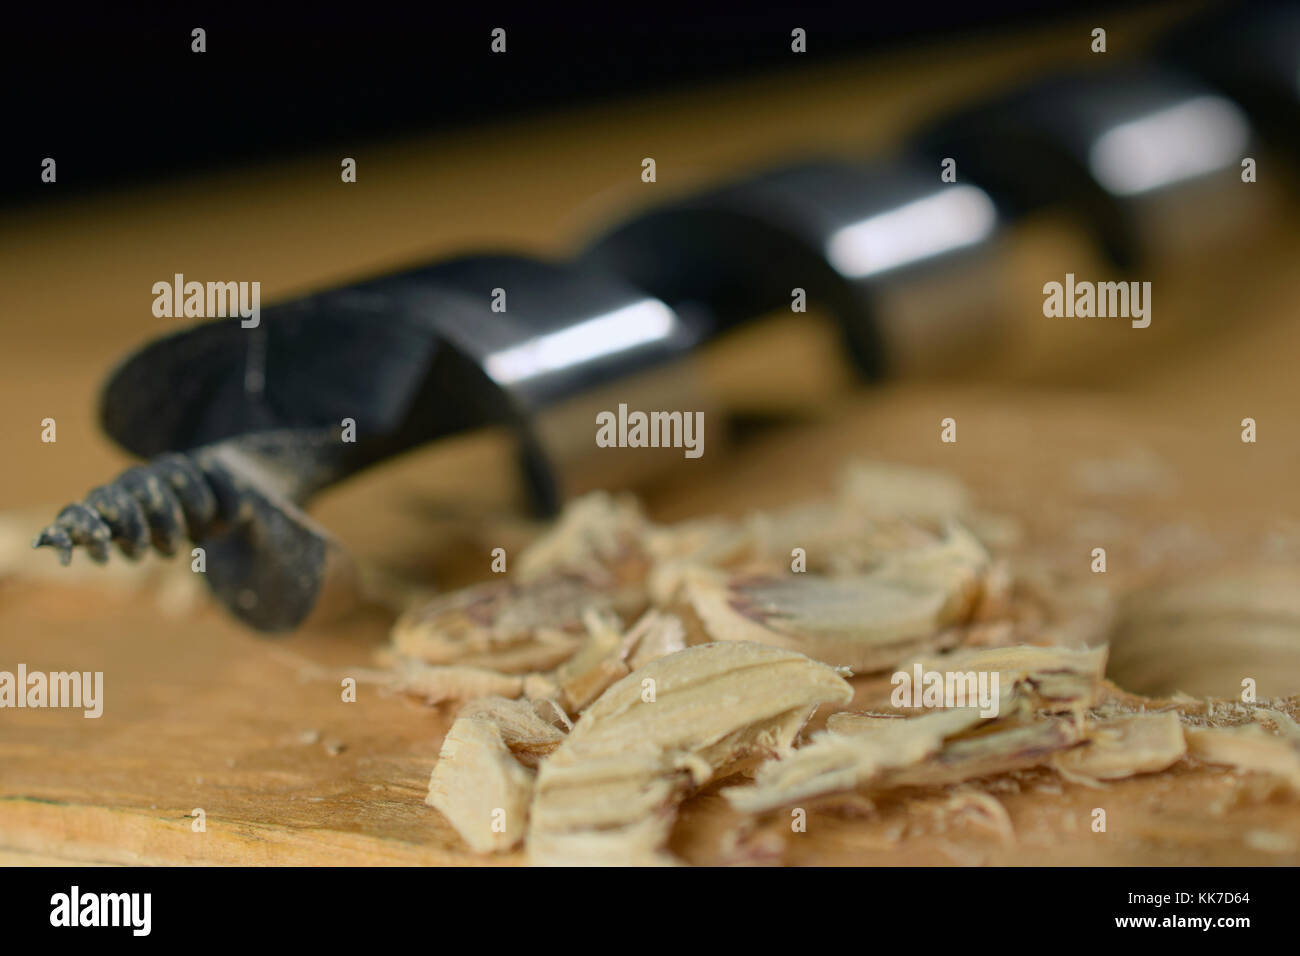 Shavings and wood drill bit on wooden board as woodworking background image. Selective focus Stock Photo